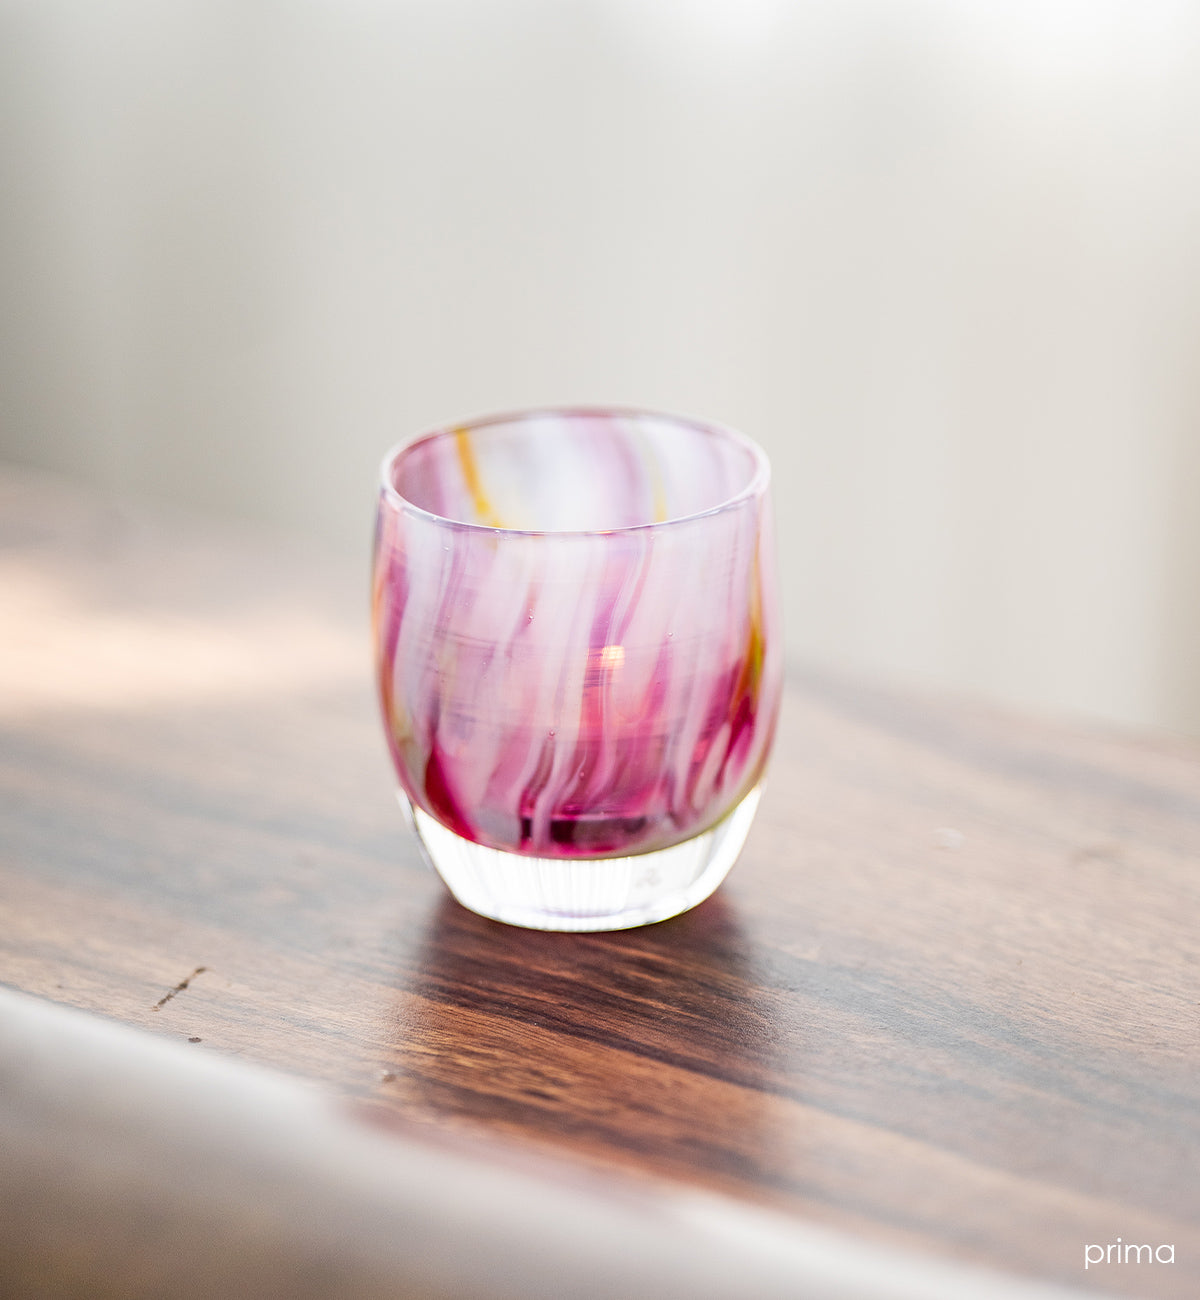 hand-blown glass votive candle holders & drinkware